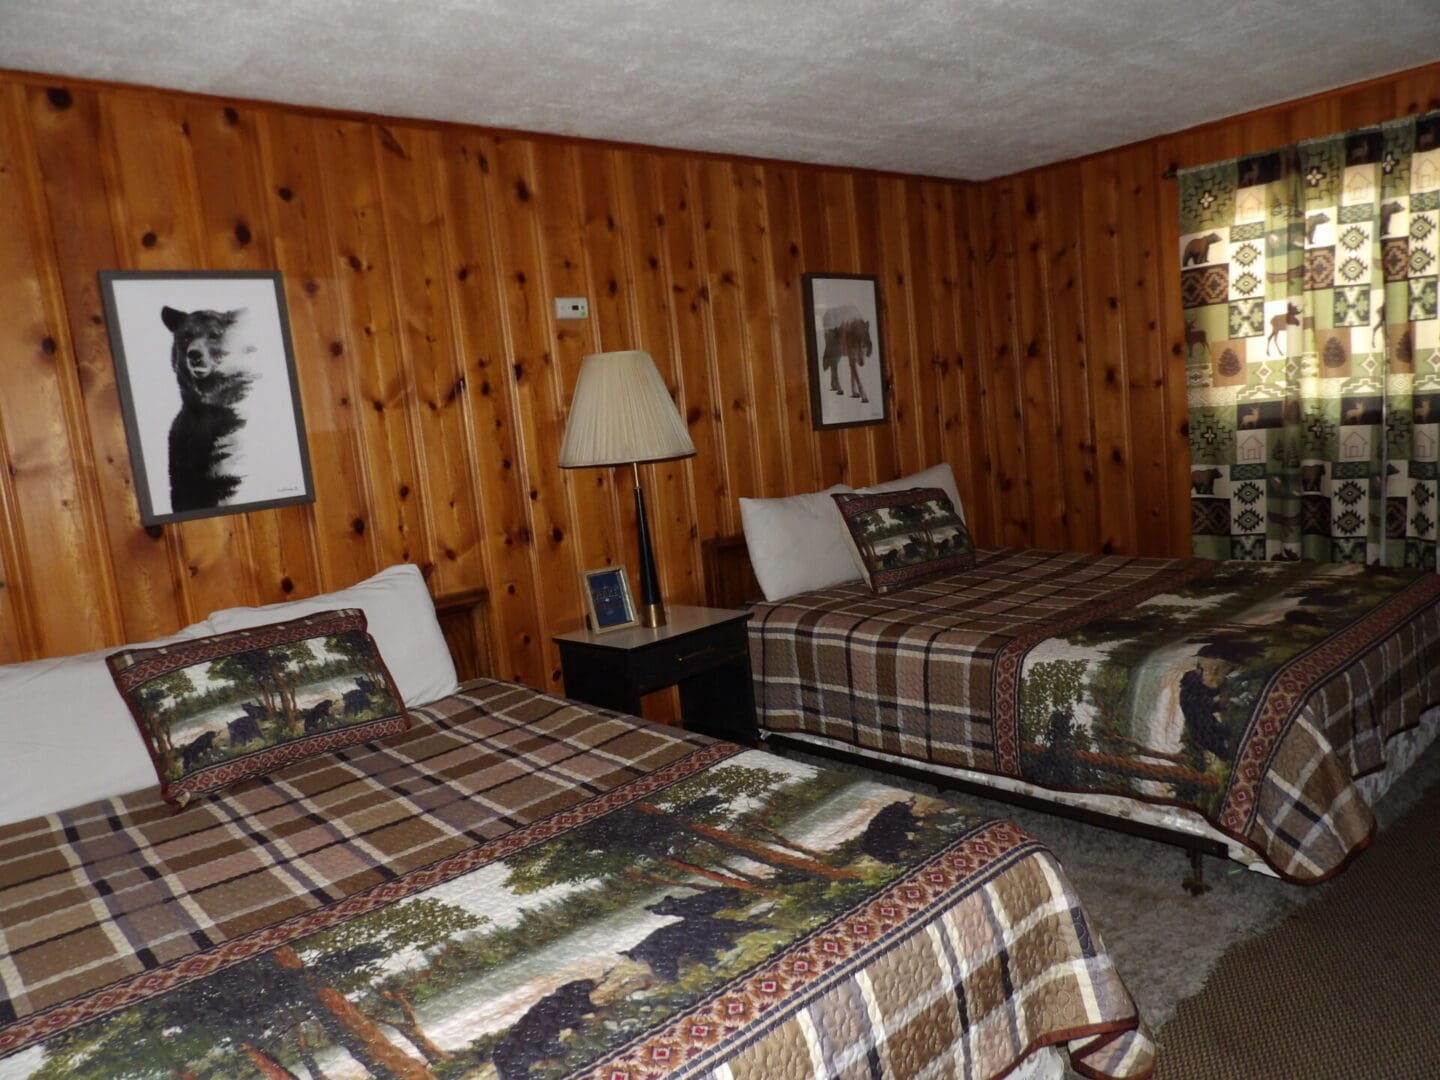 A bedroom with two beds and wood paneled walls.